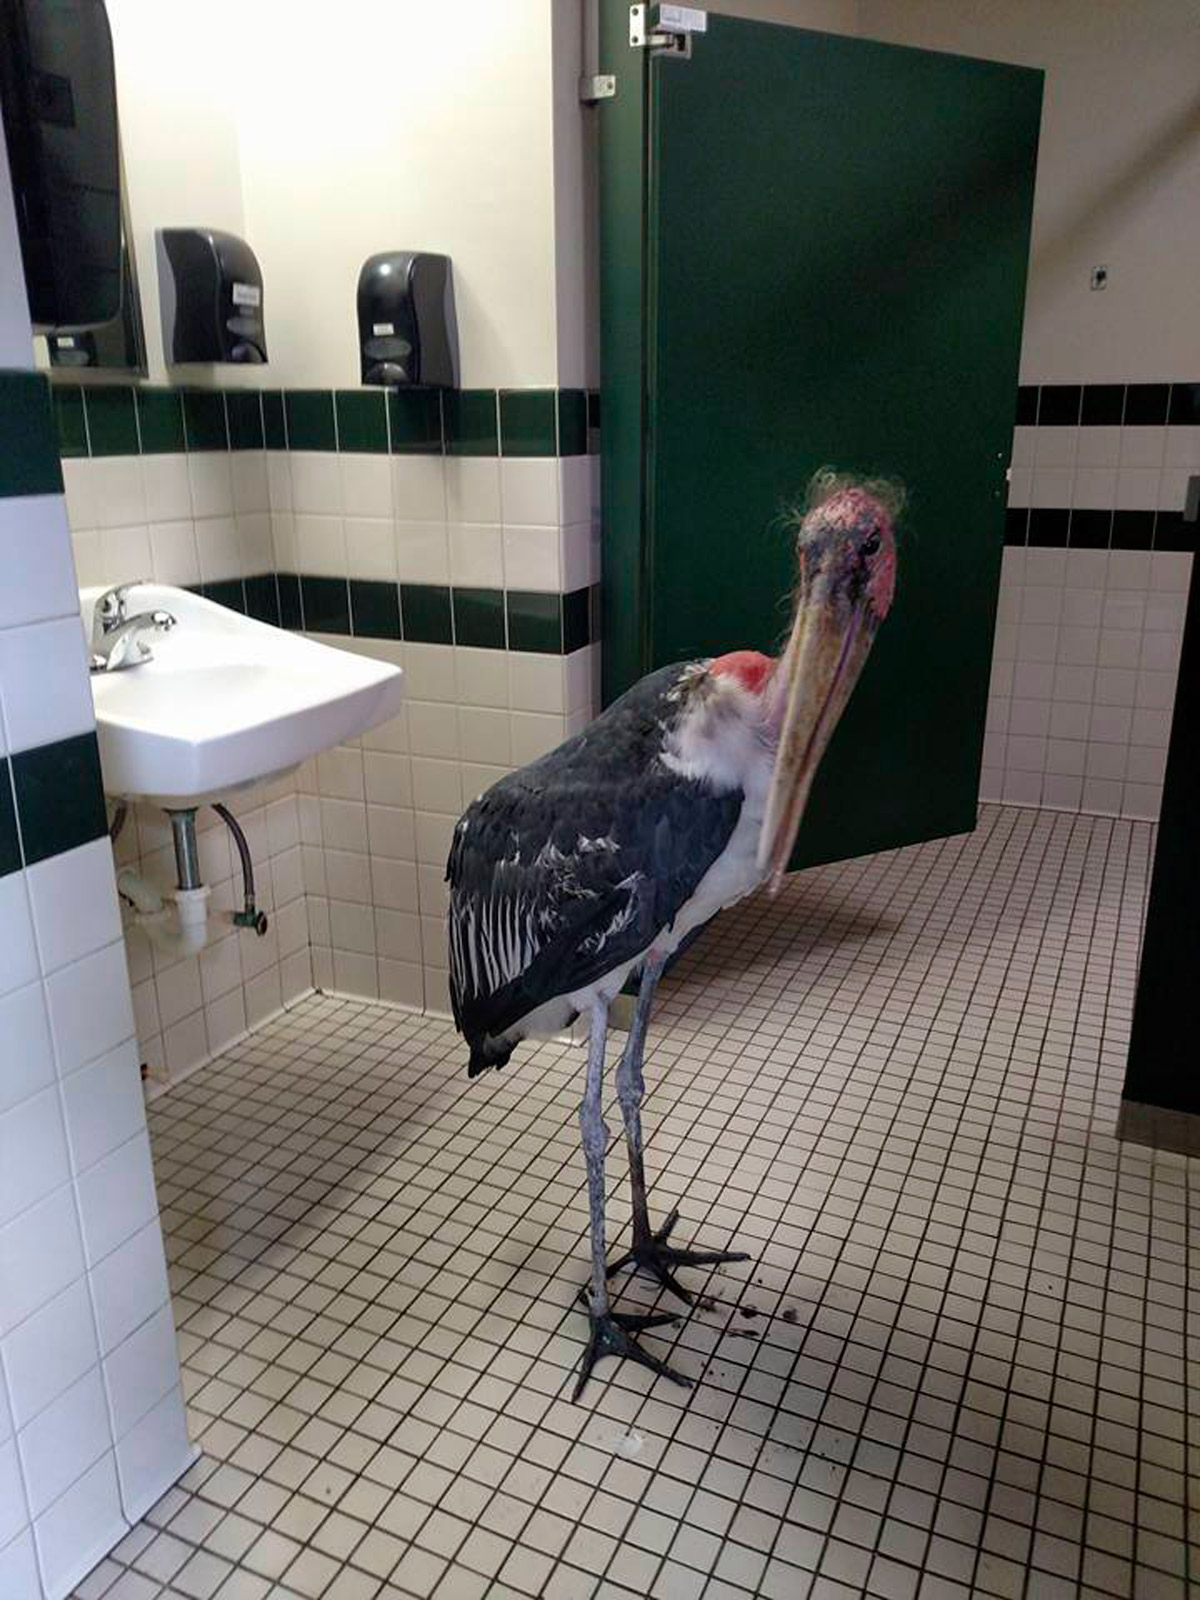 A marabou stork in a restroom at the St. Augustine Alligator Farm and Zoological Park on Oct. 6, 2016. (Gen Anderson—St. Augustine Alligator Farm and Zoological Park/AP)